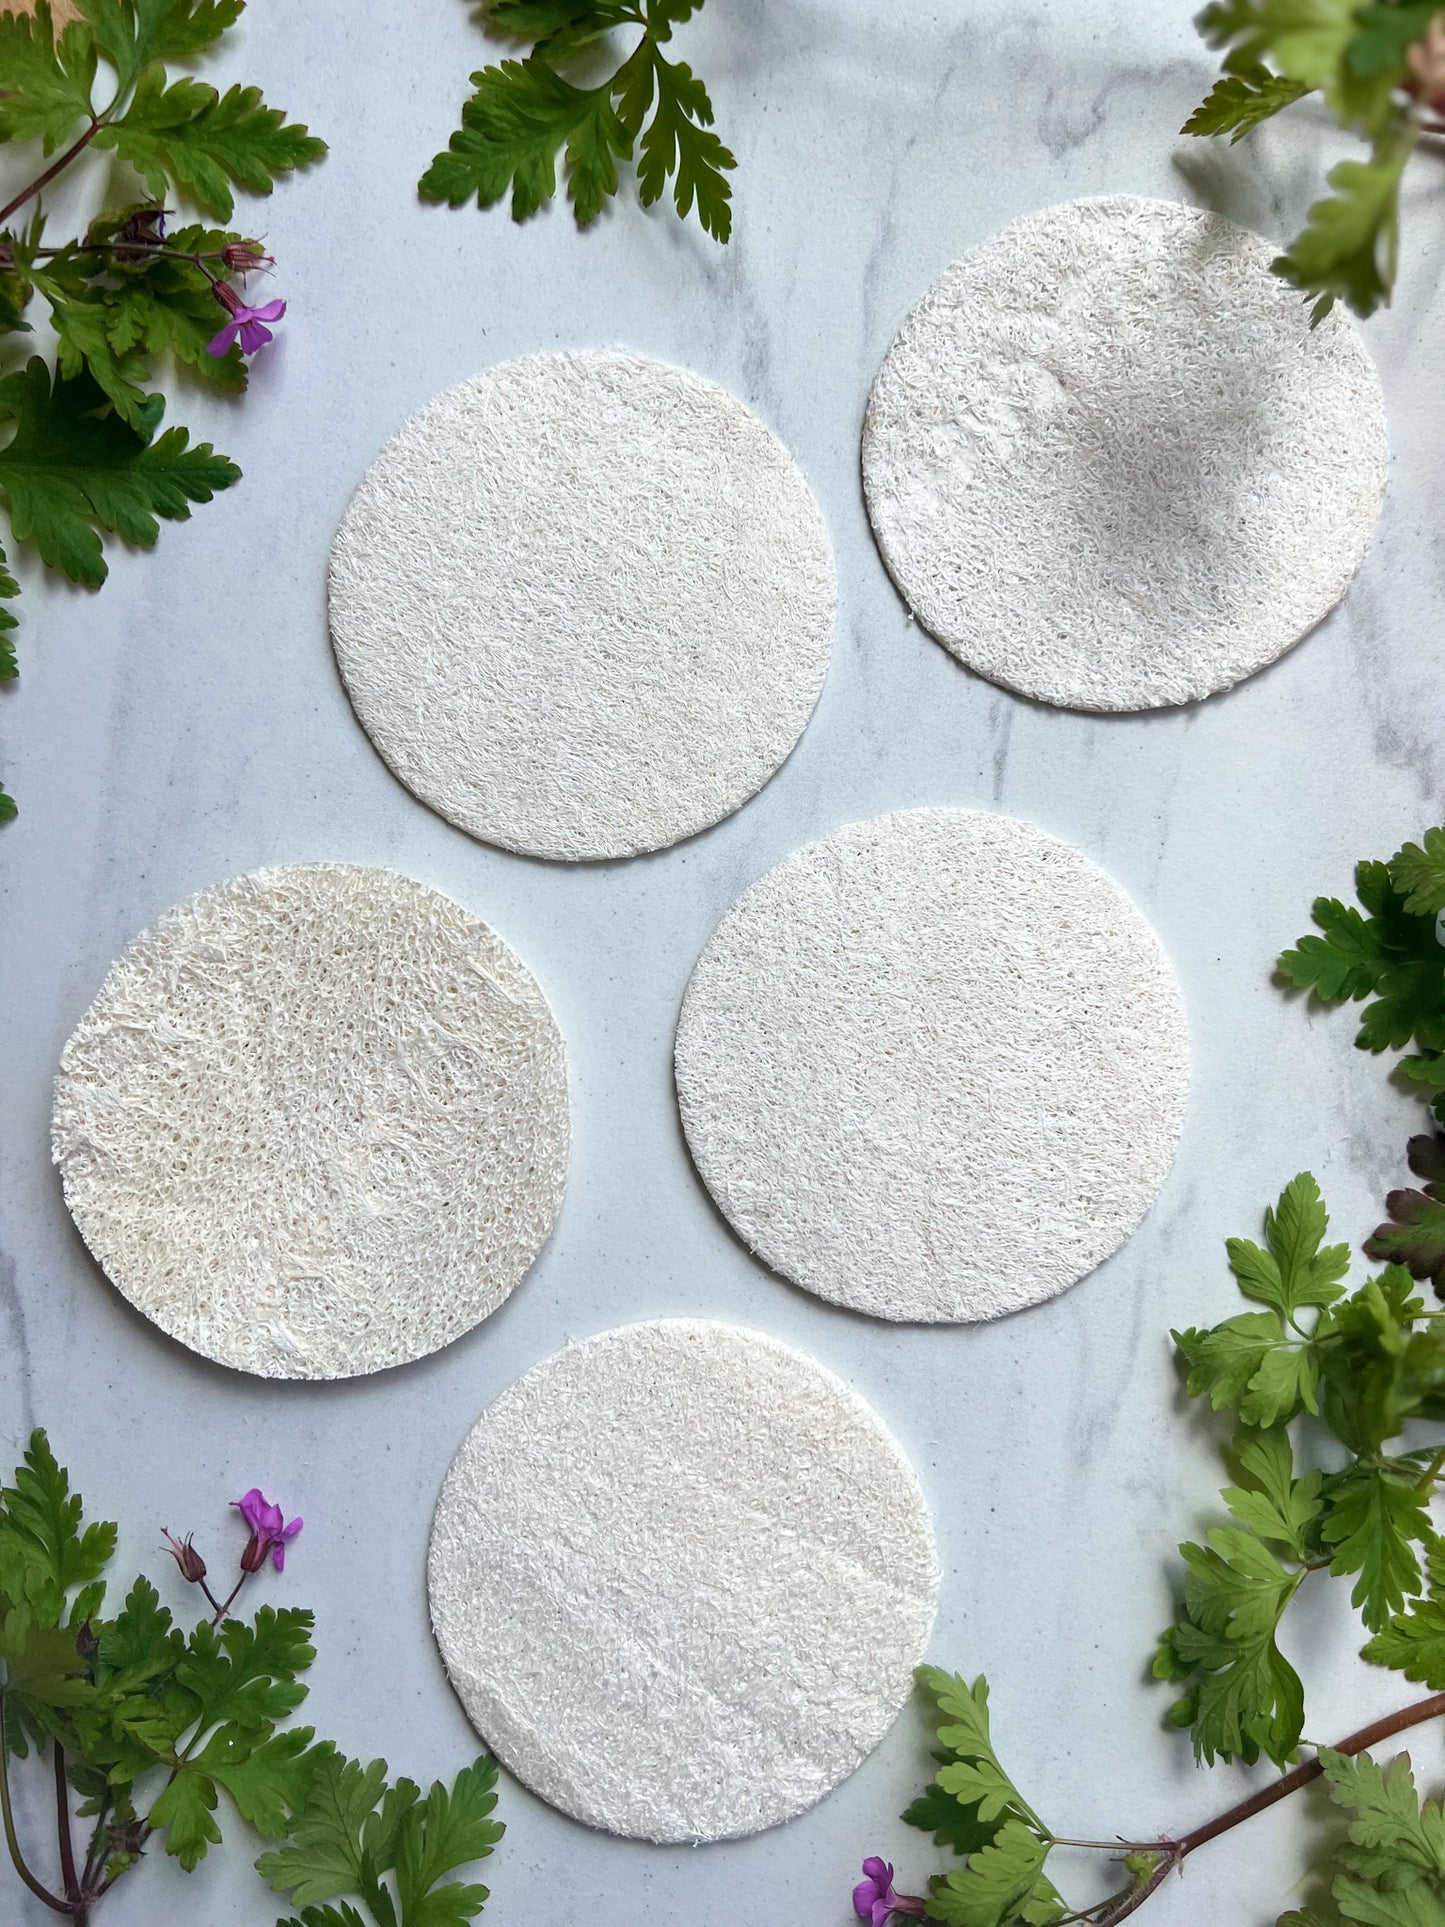 Fawn Lily Botanica | Luffa Loofah Facial Sponge - soft, USA grown, sustainable and organic, 3.5 inch disc